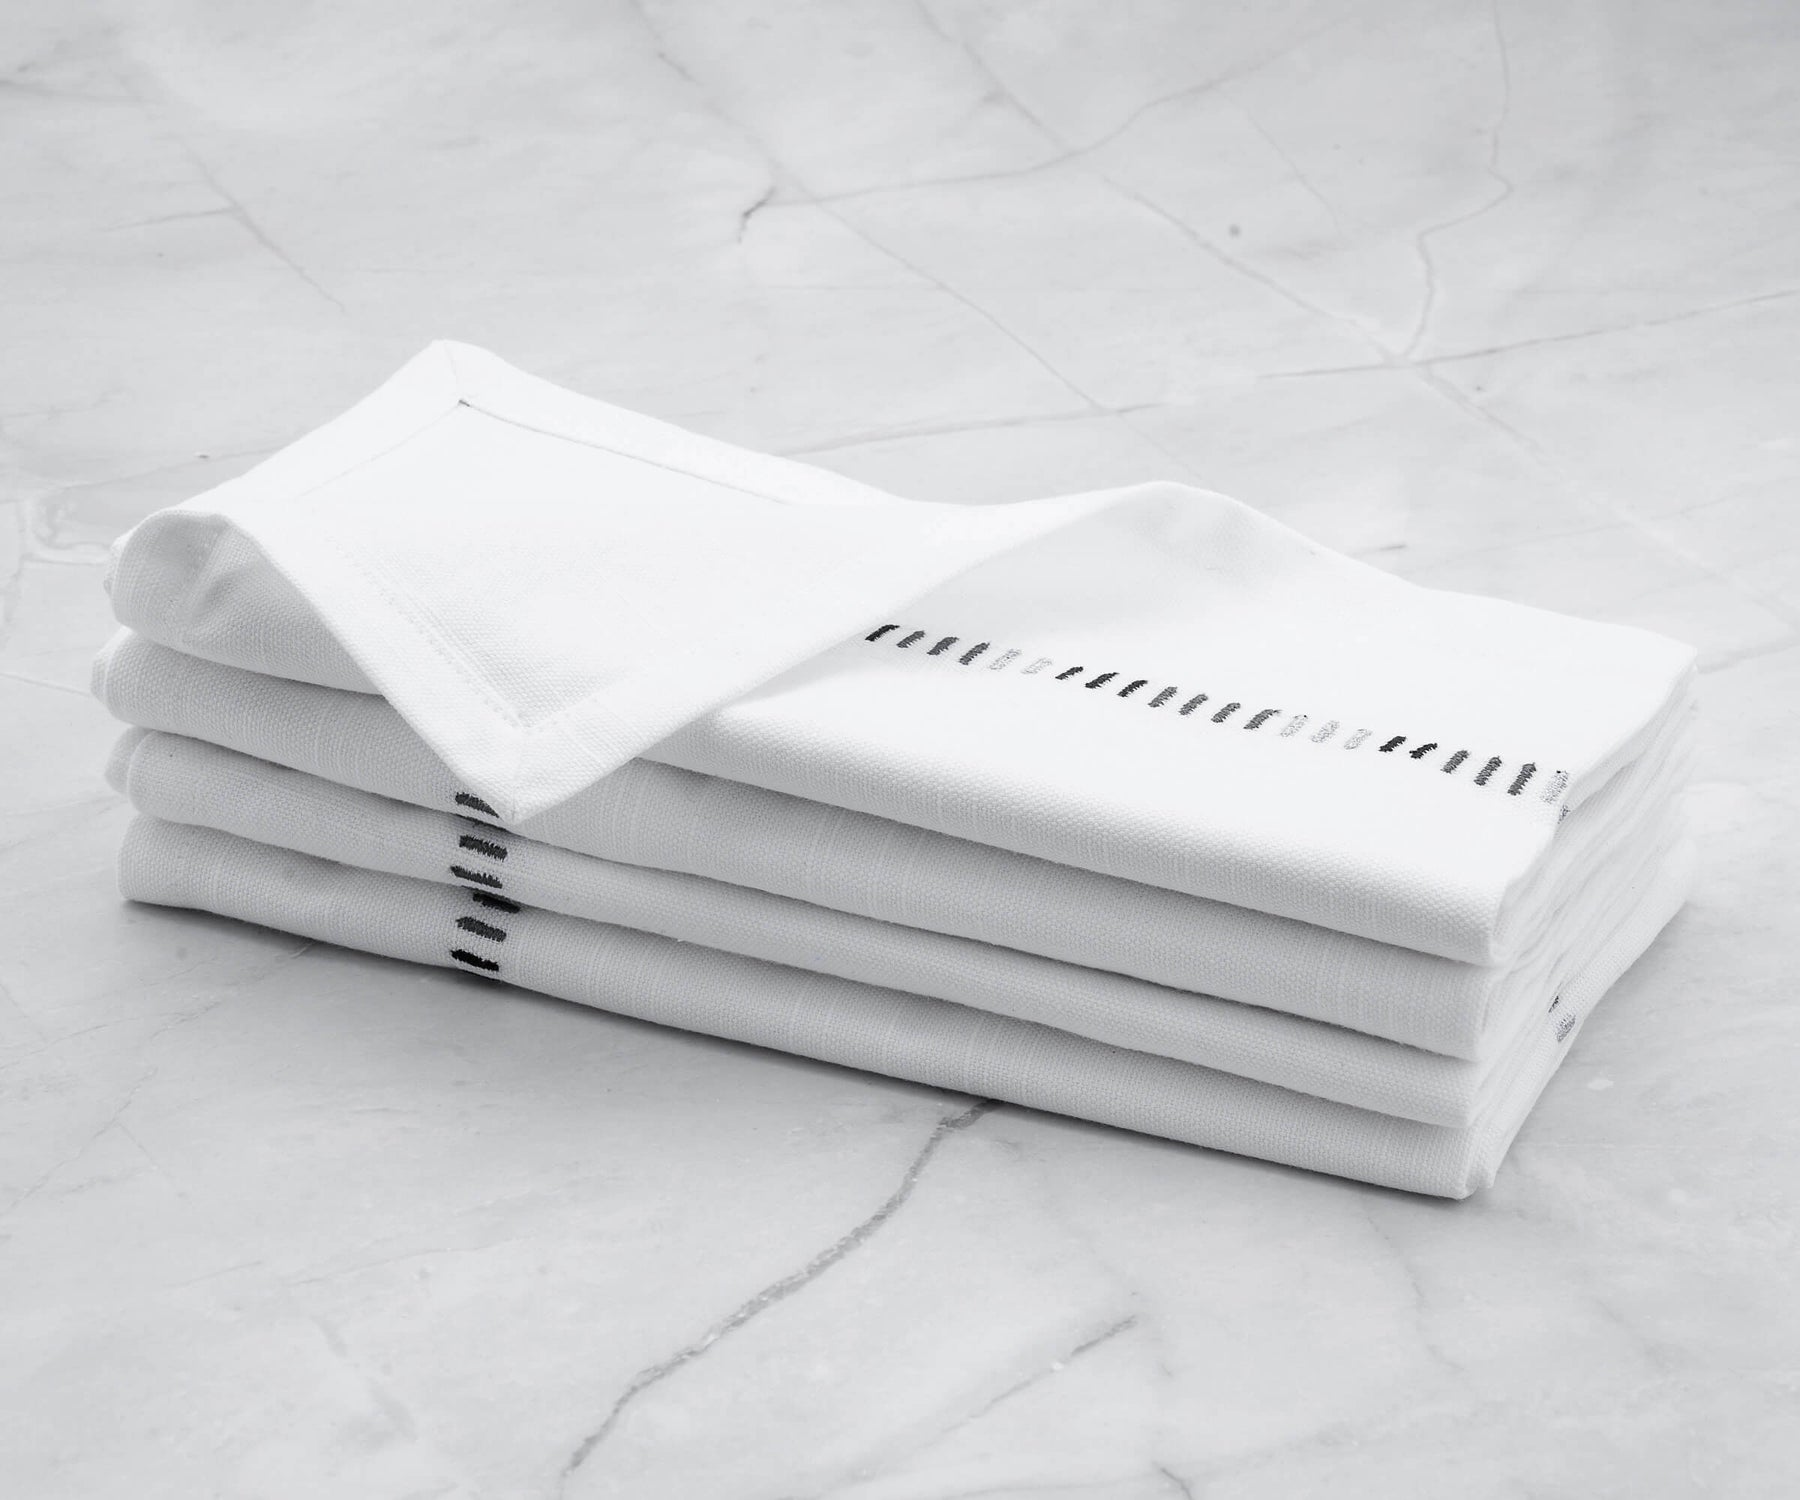 Soft and durable cloth napkins made from 100% cotton.